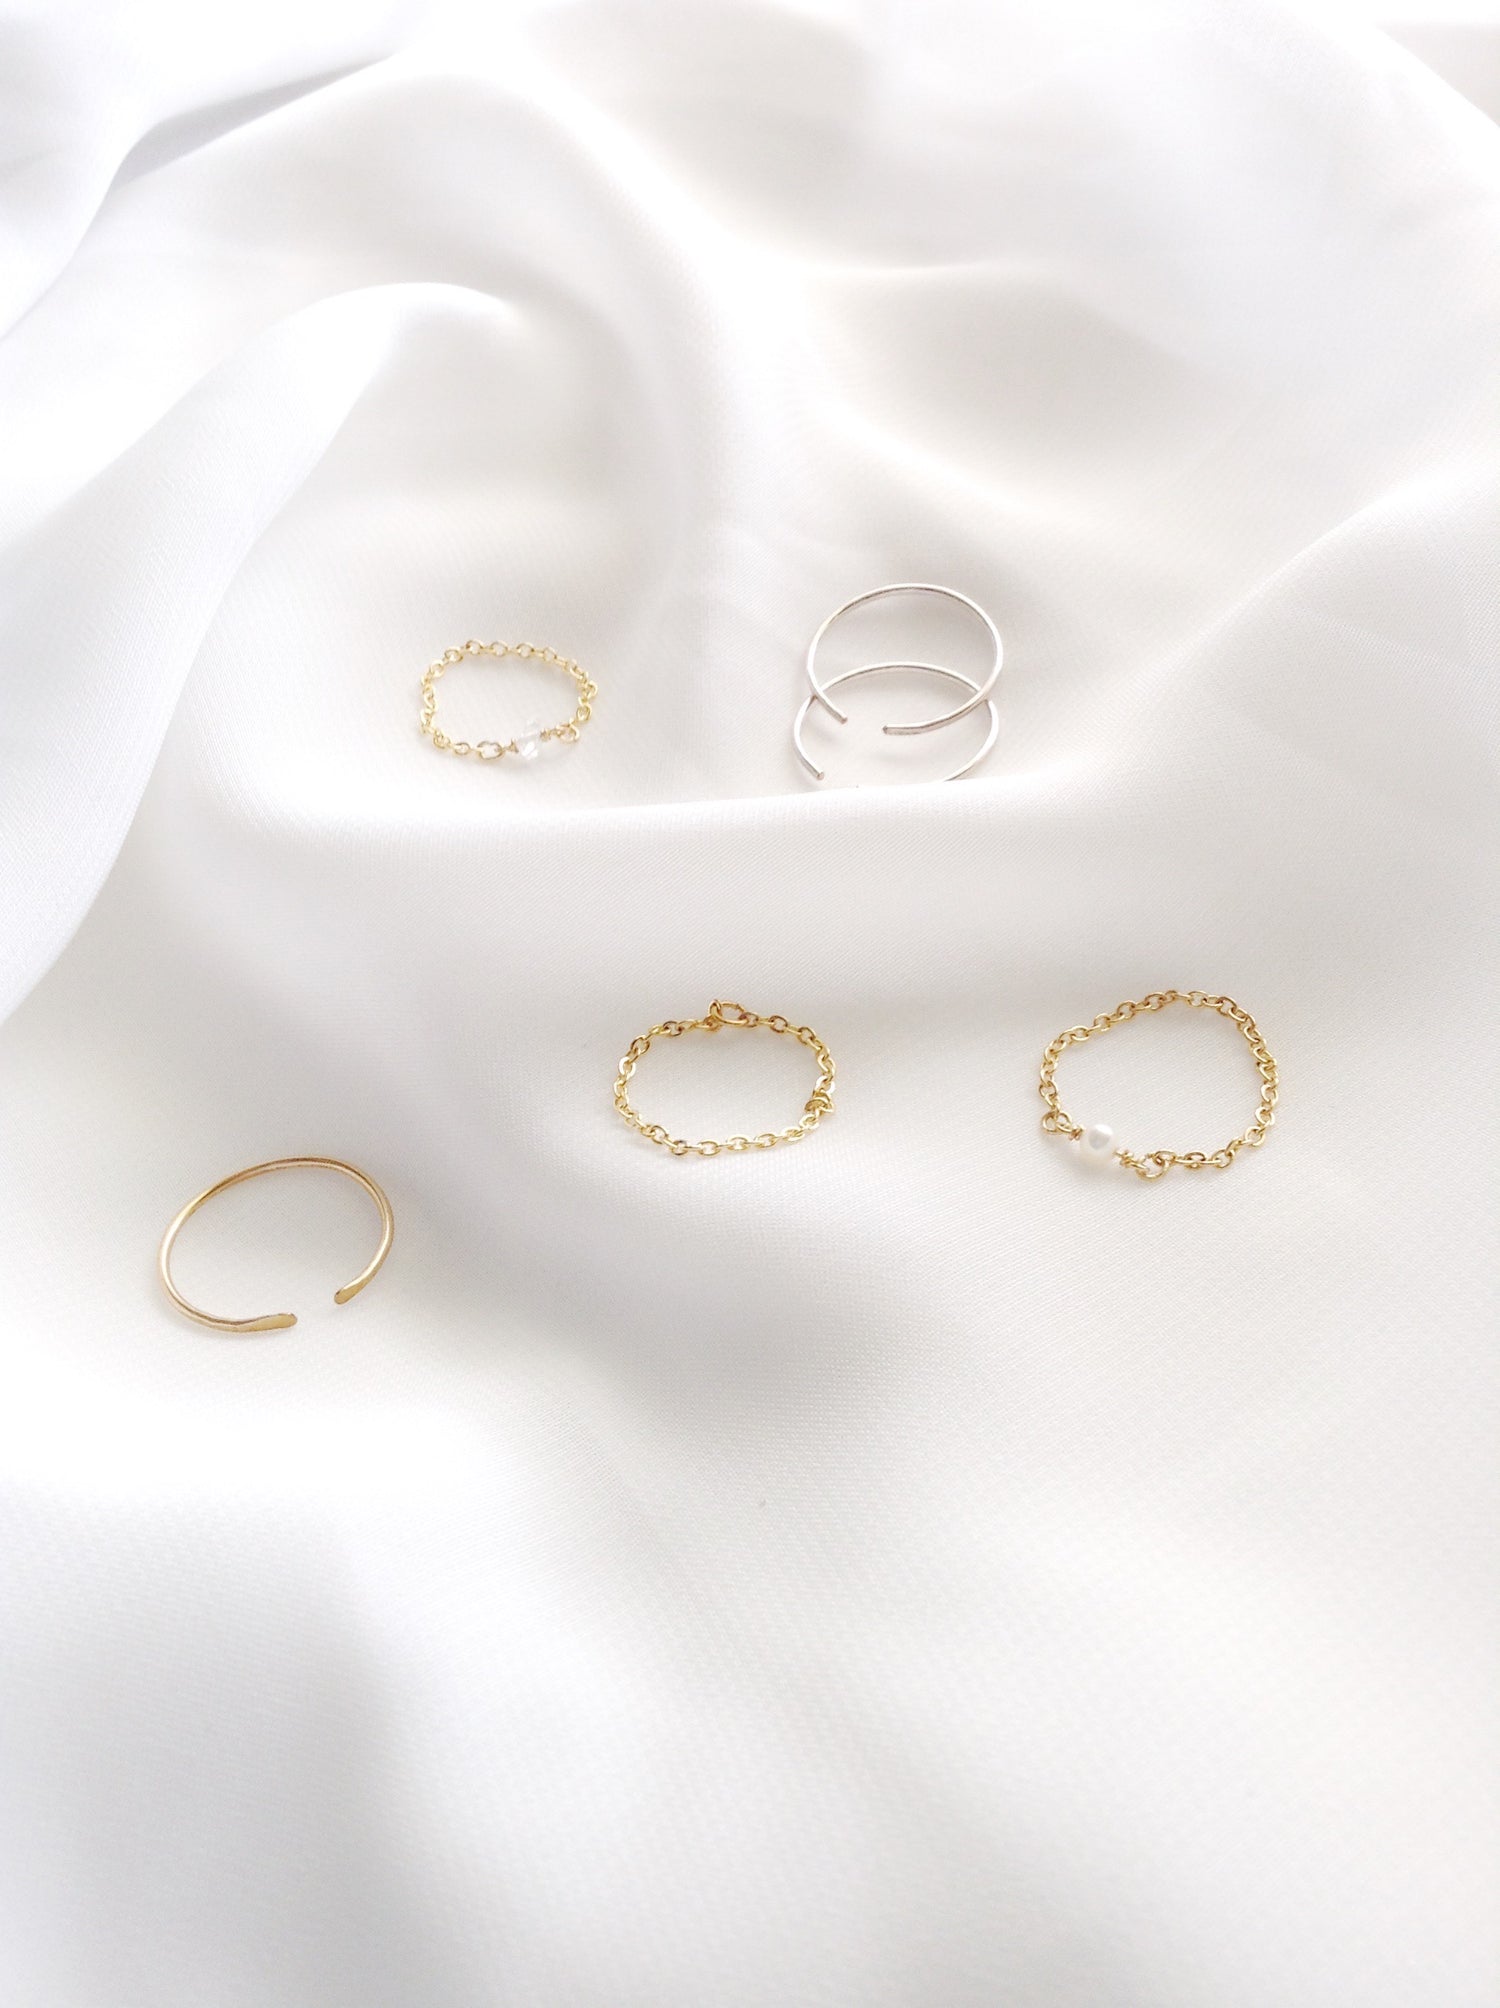 Delicate and Minimalist Rings | IB Jewelry